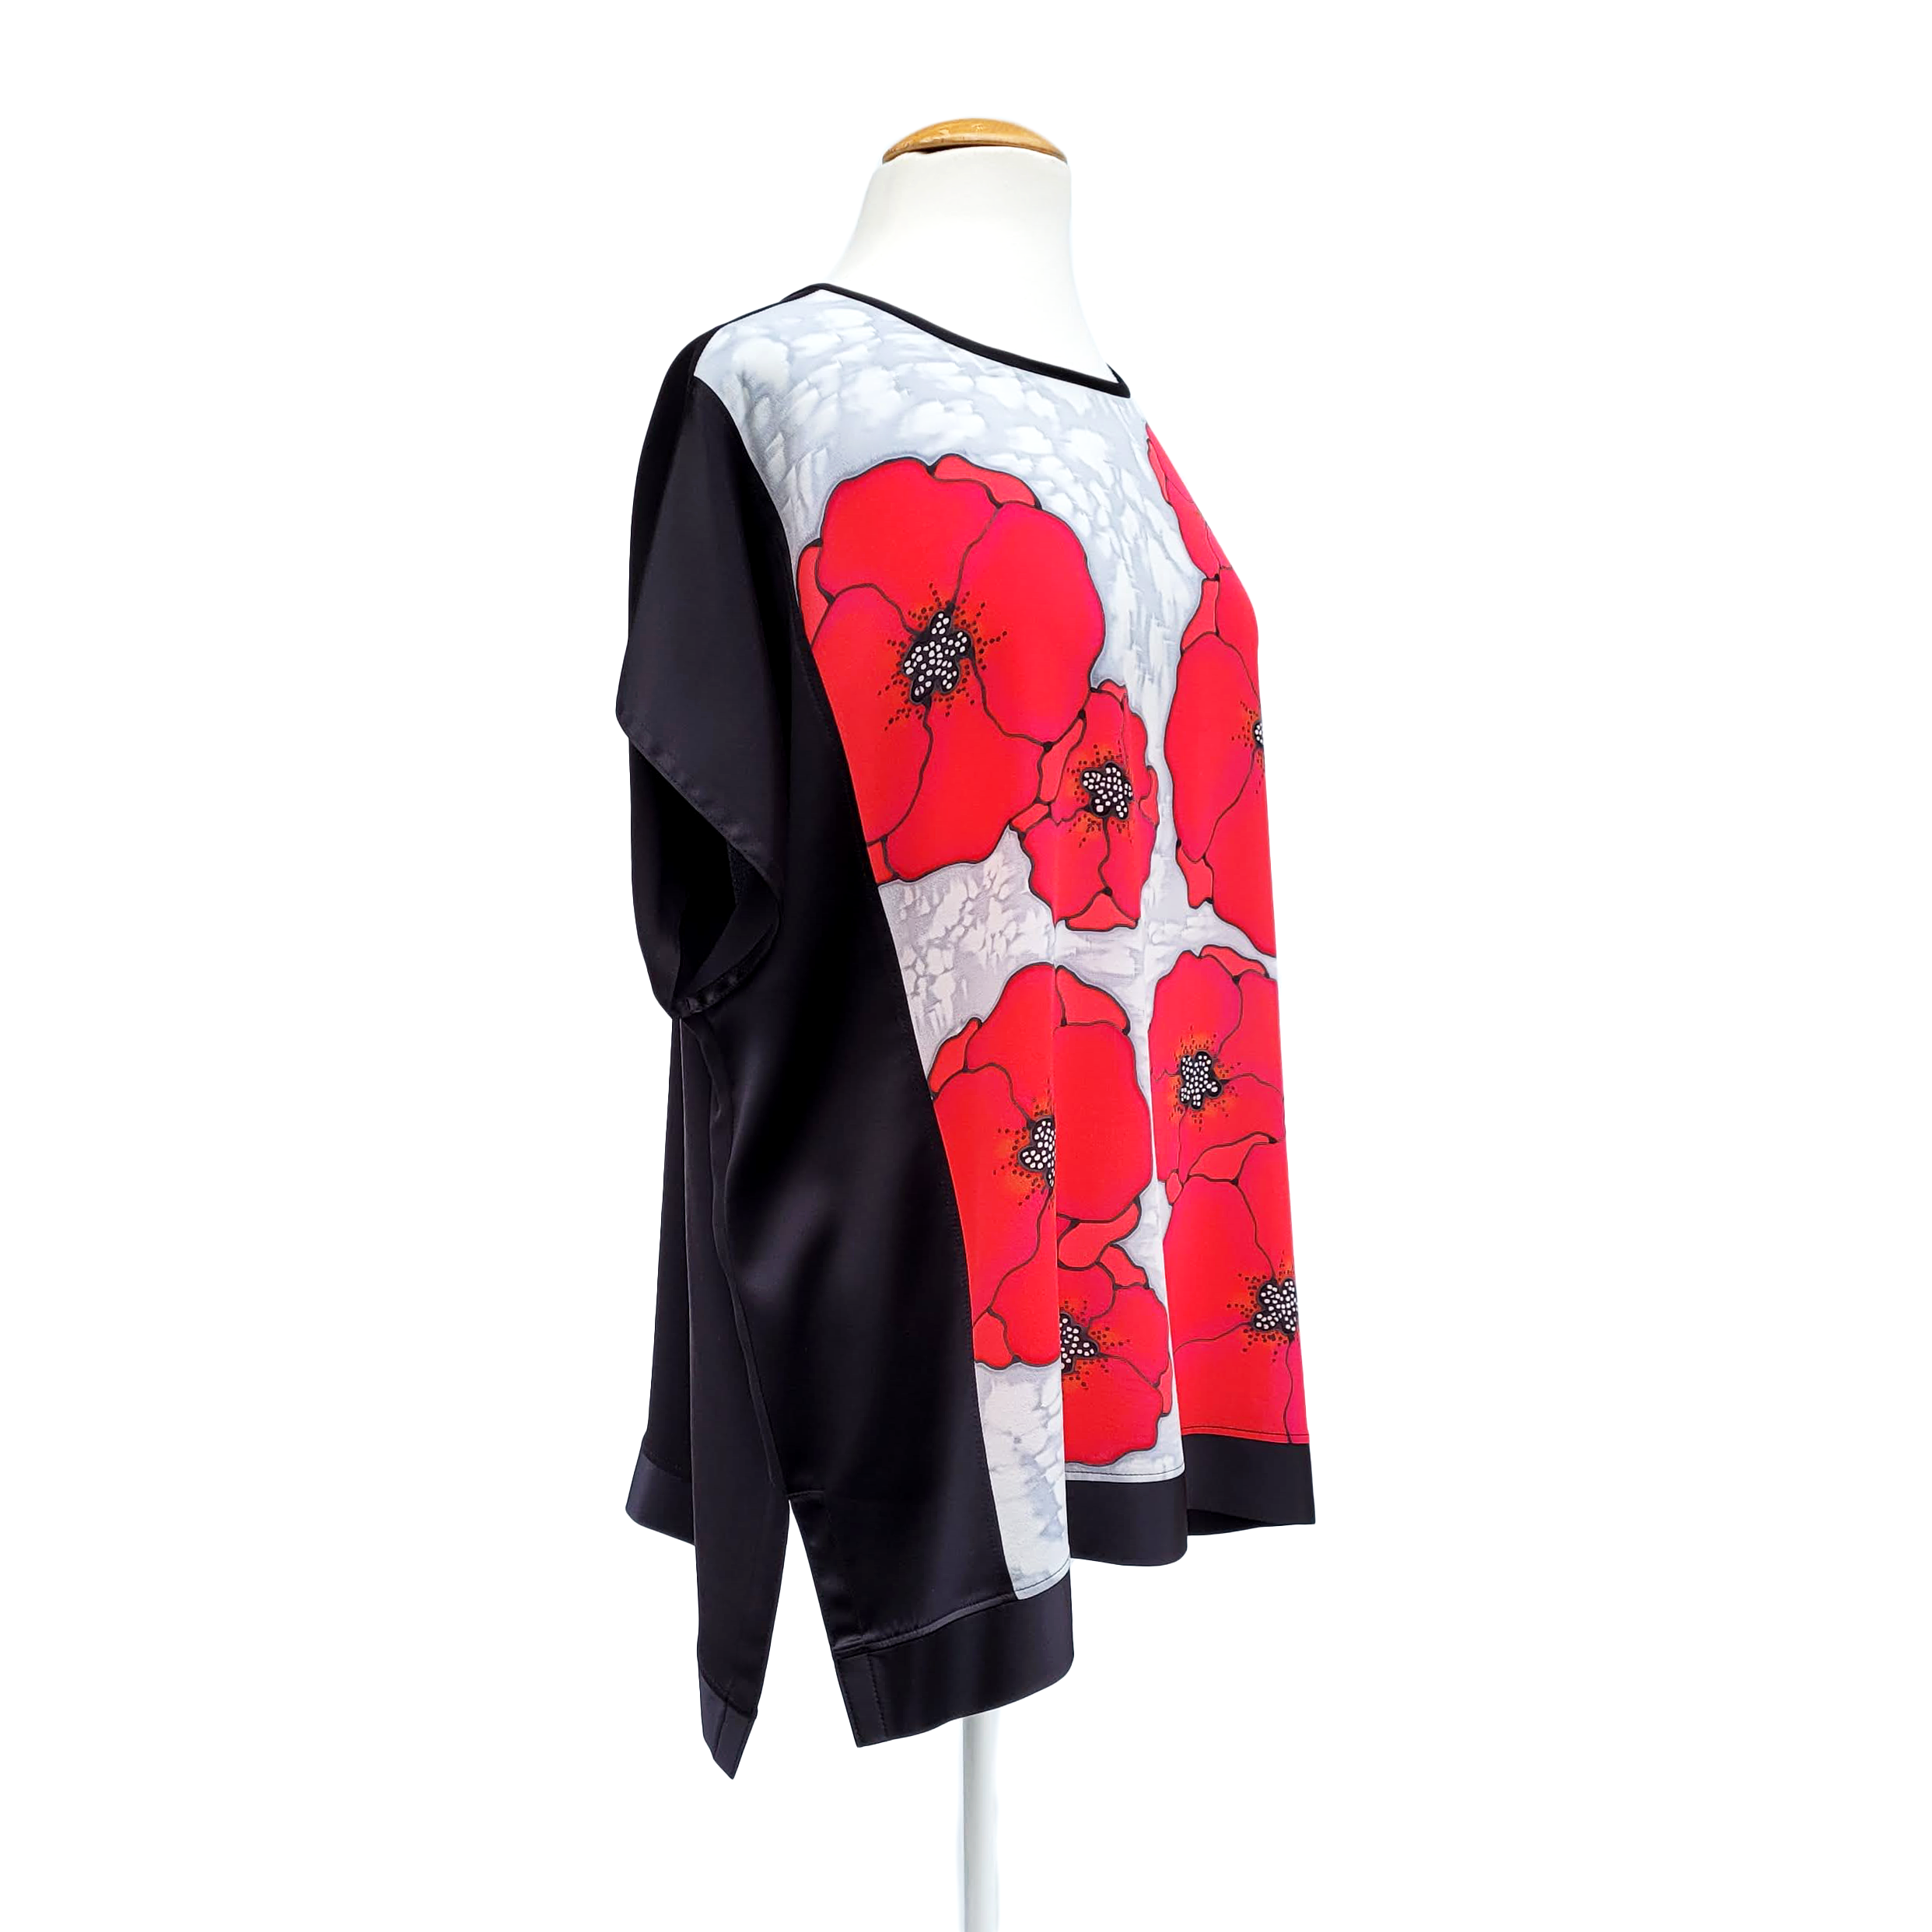 pure silk top womens clothing hand painted red silver poppy art design  t-top tunic blouse handmade by Lynne Kiel